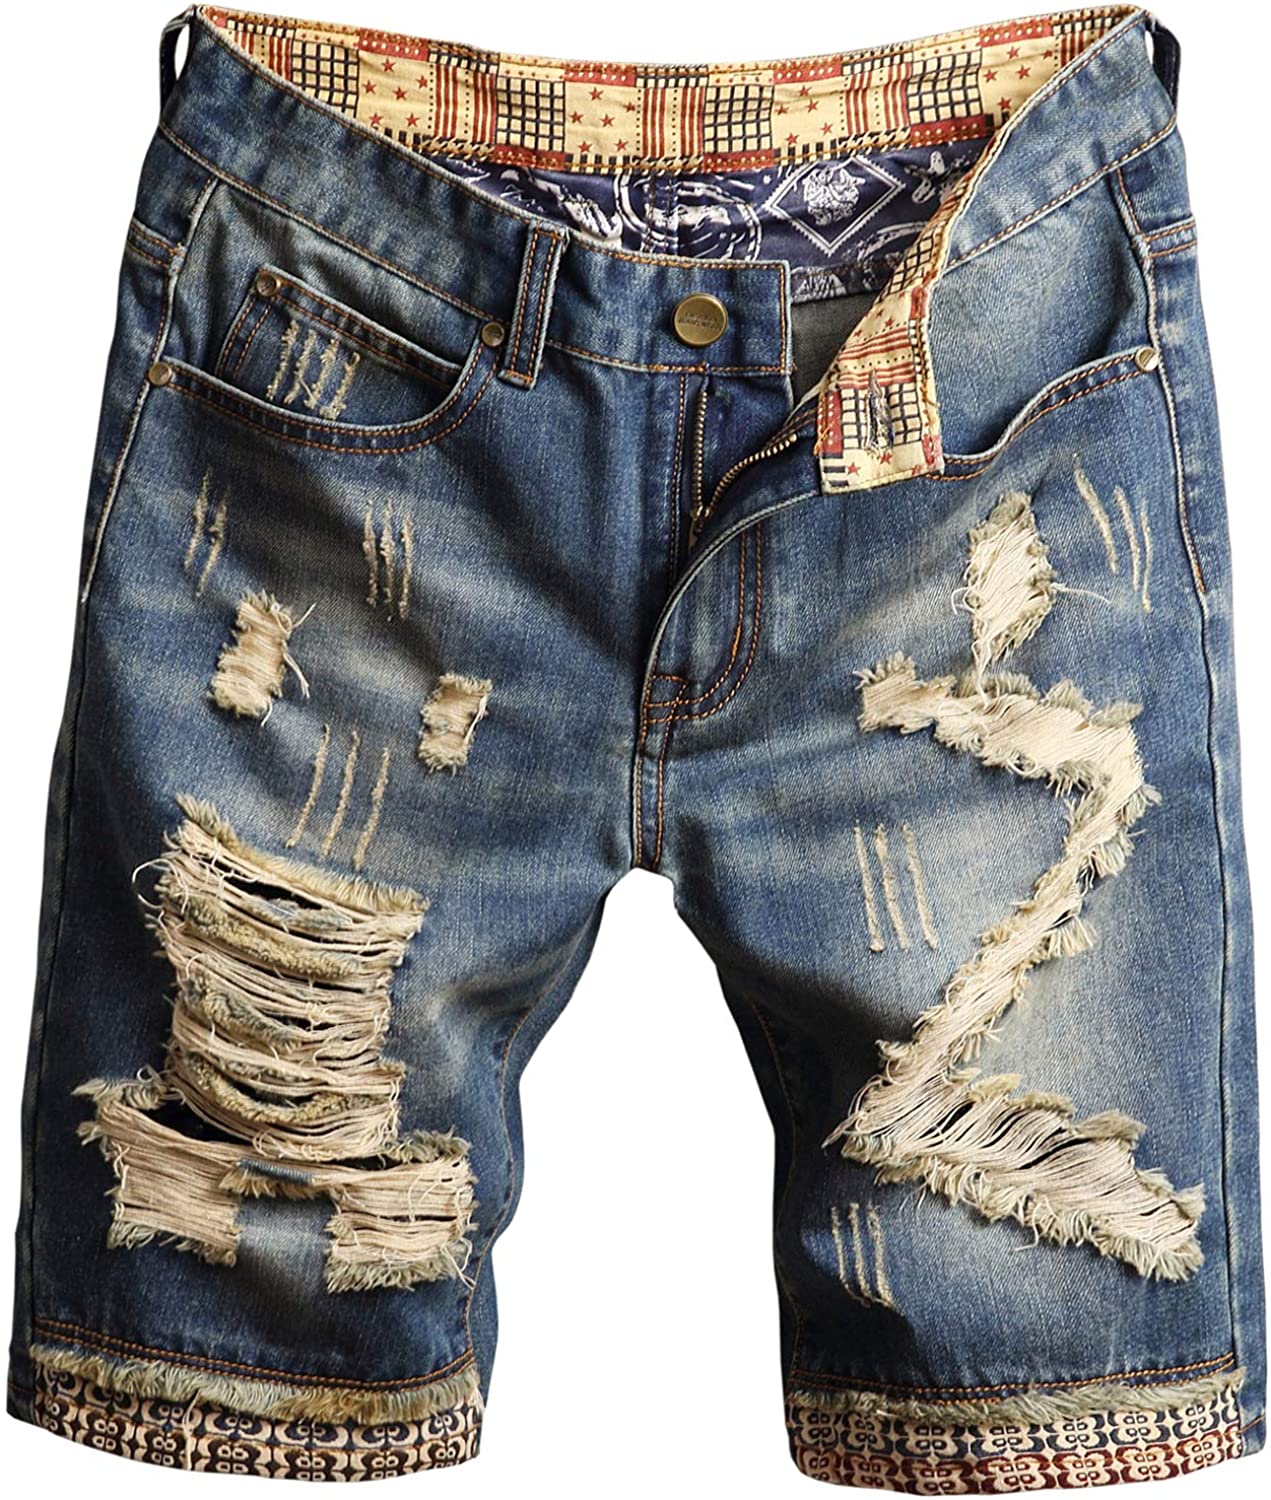 HENGAO Mens Vintage Ripped Holes Mid Rise Washed Jeans Slim Shorts